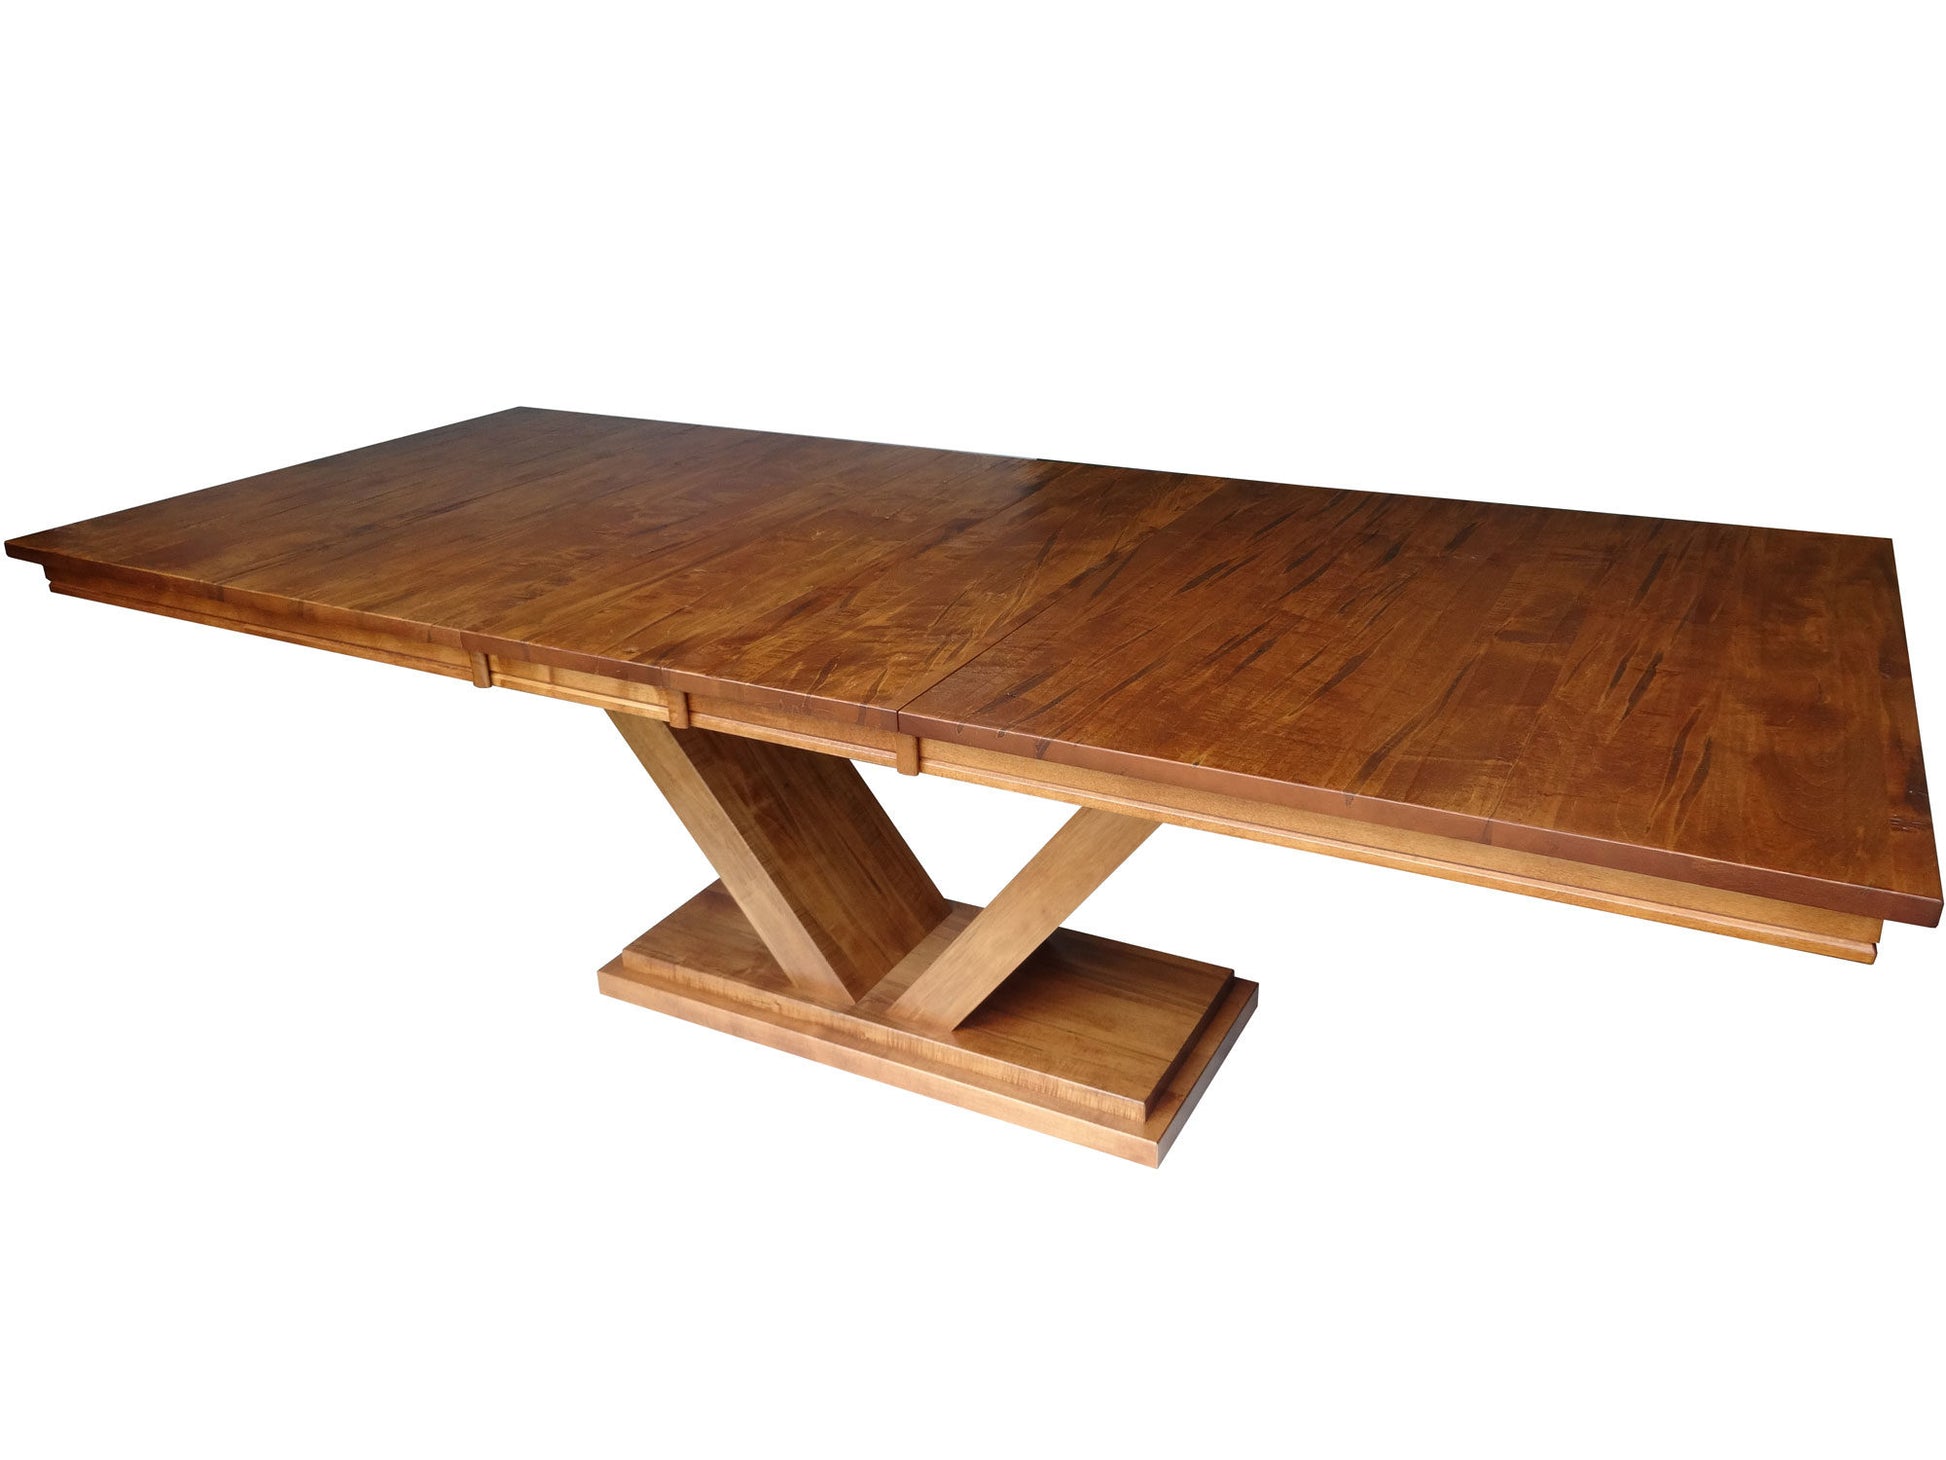 Ambassador Dining Table with self storage leaves